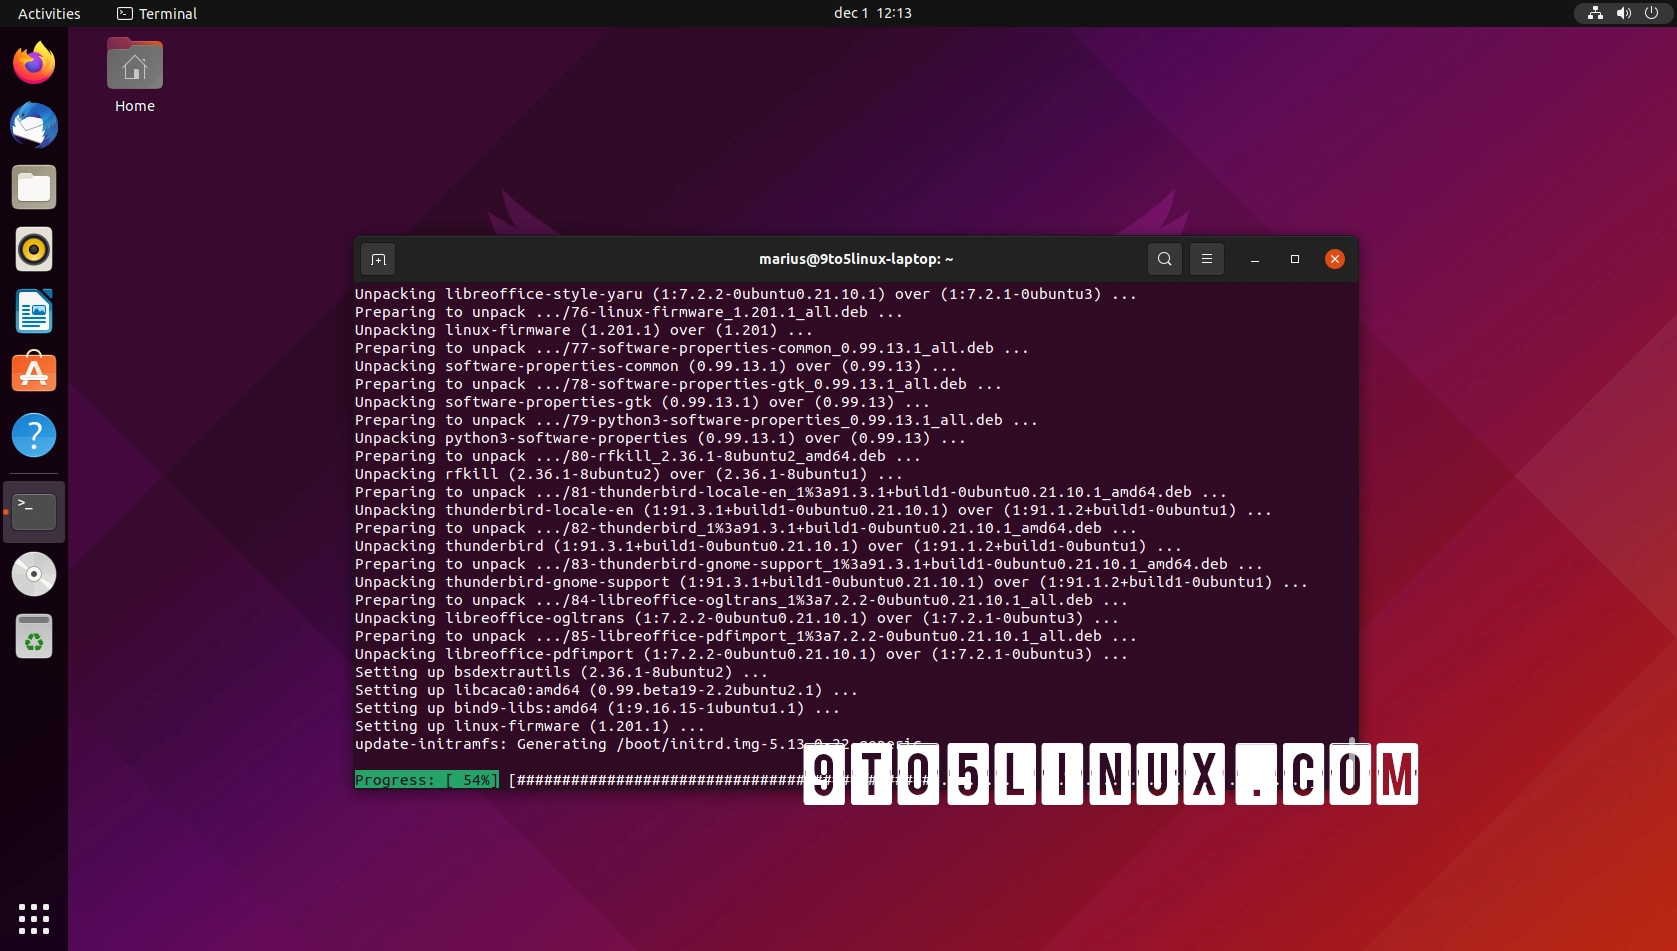 New Ubuntu Linux Kernel Security Patches Address 6 Vulnerabilities, Update Now